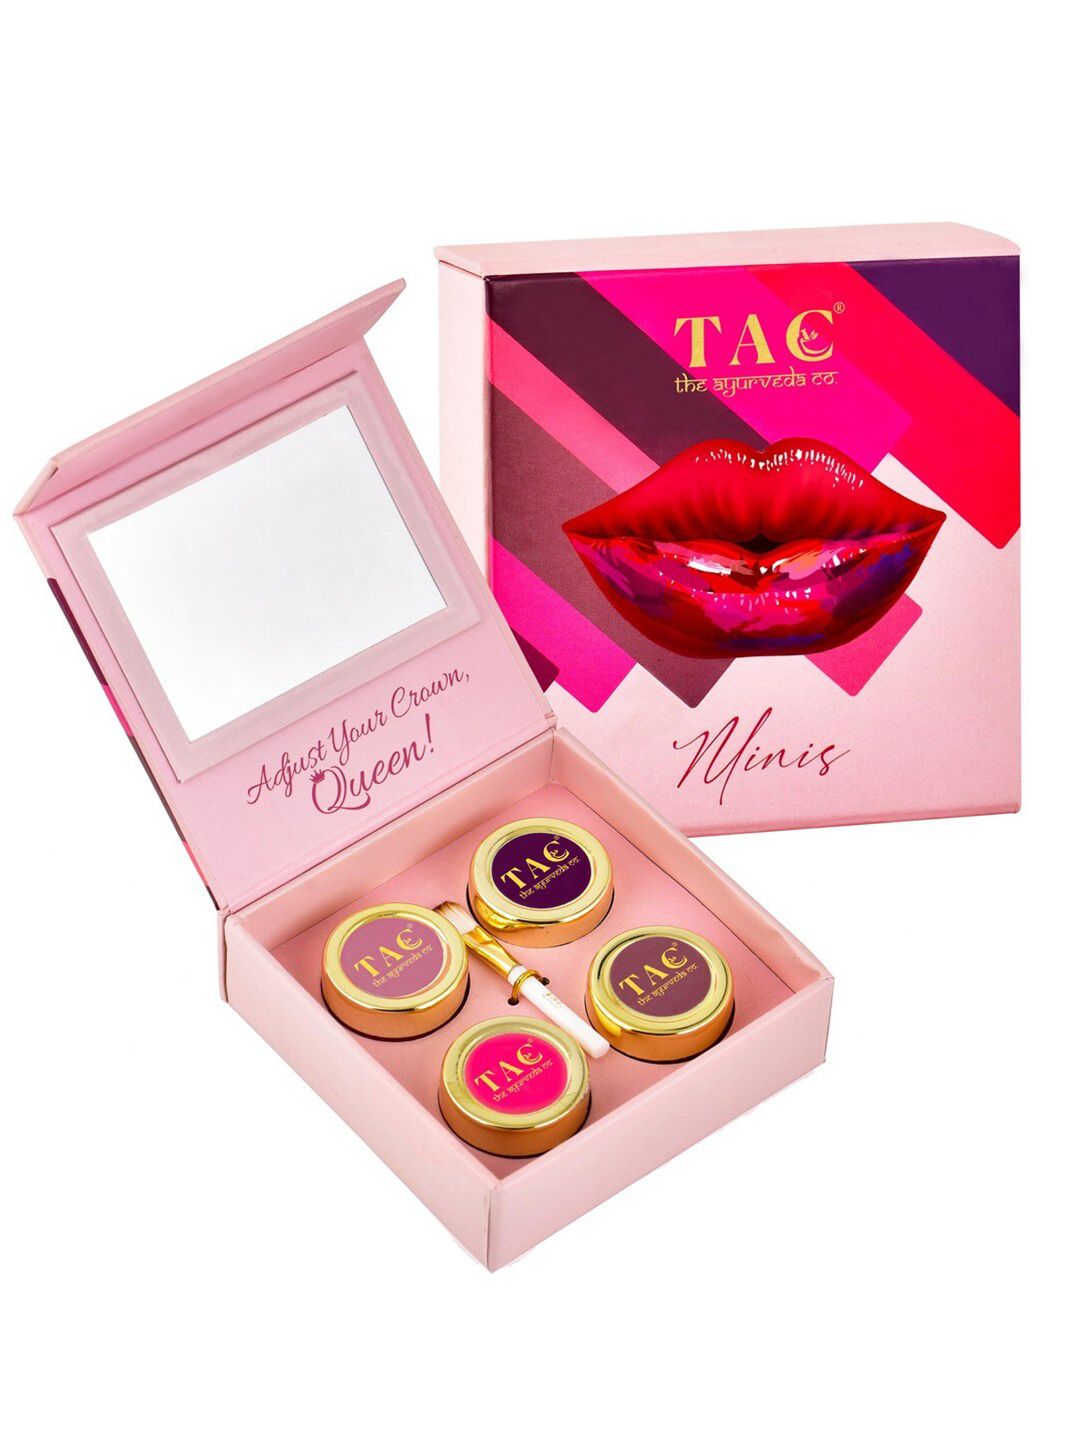 TAC- The Ayurveda Co. Lip-Cheek Tint Minis Gift Set - Multi Color Pack Price in India